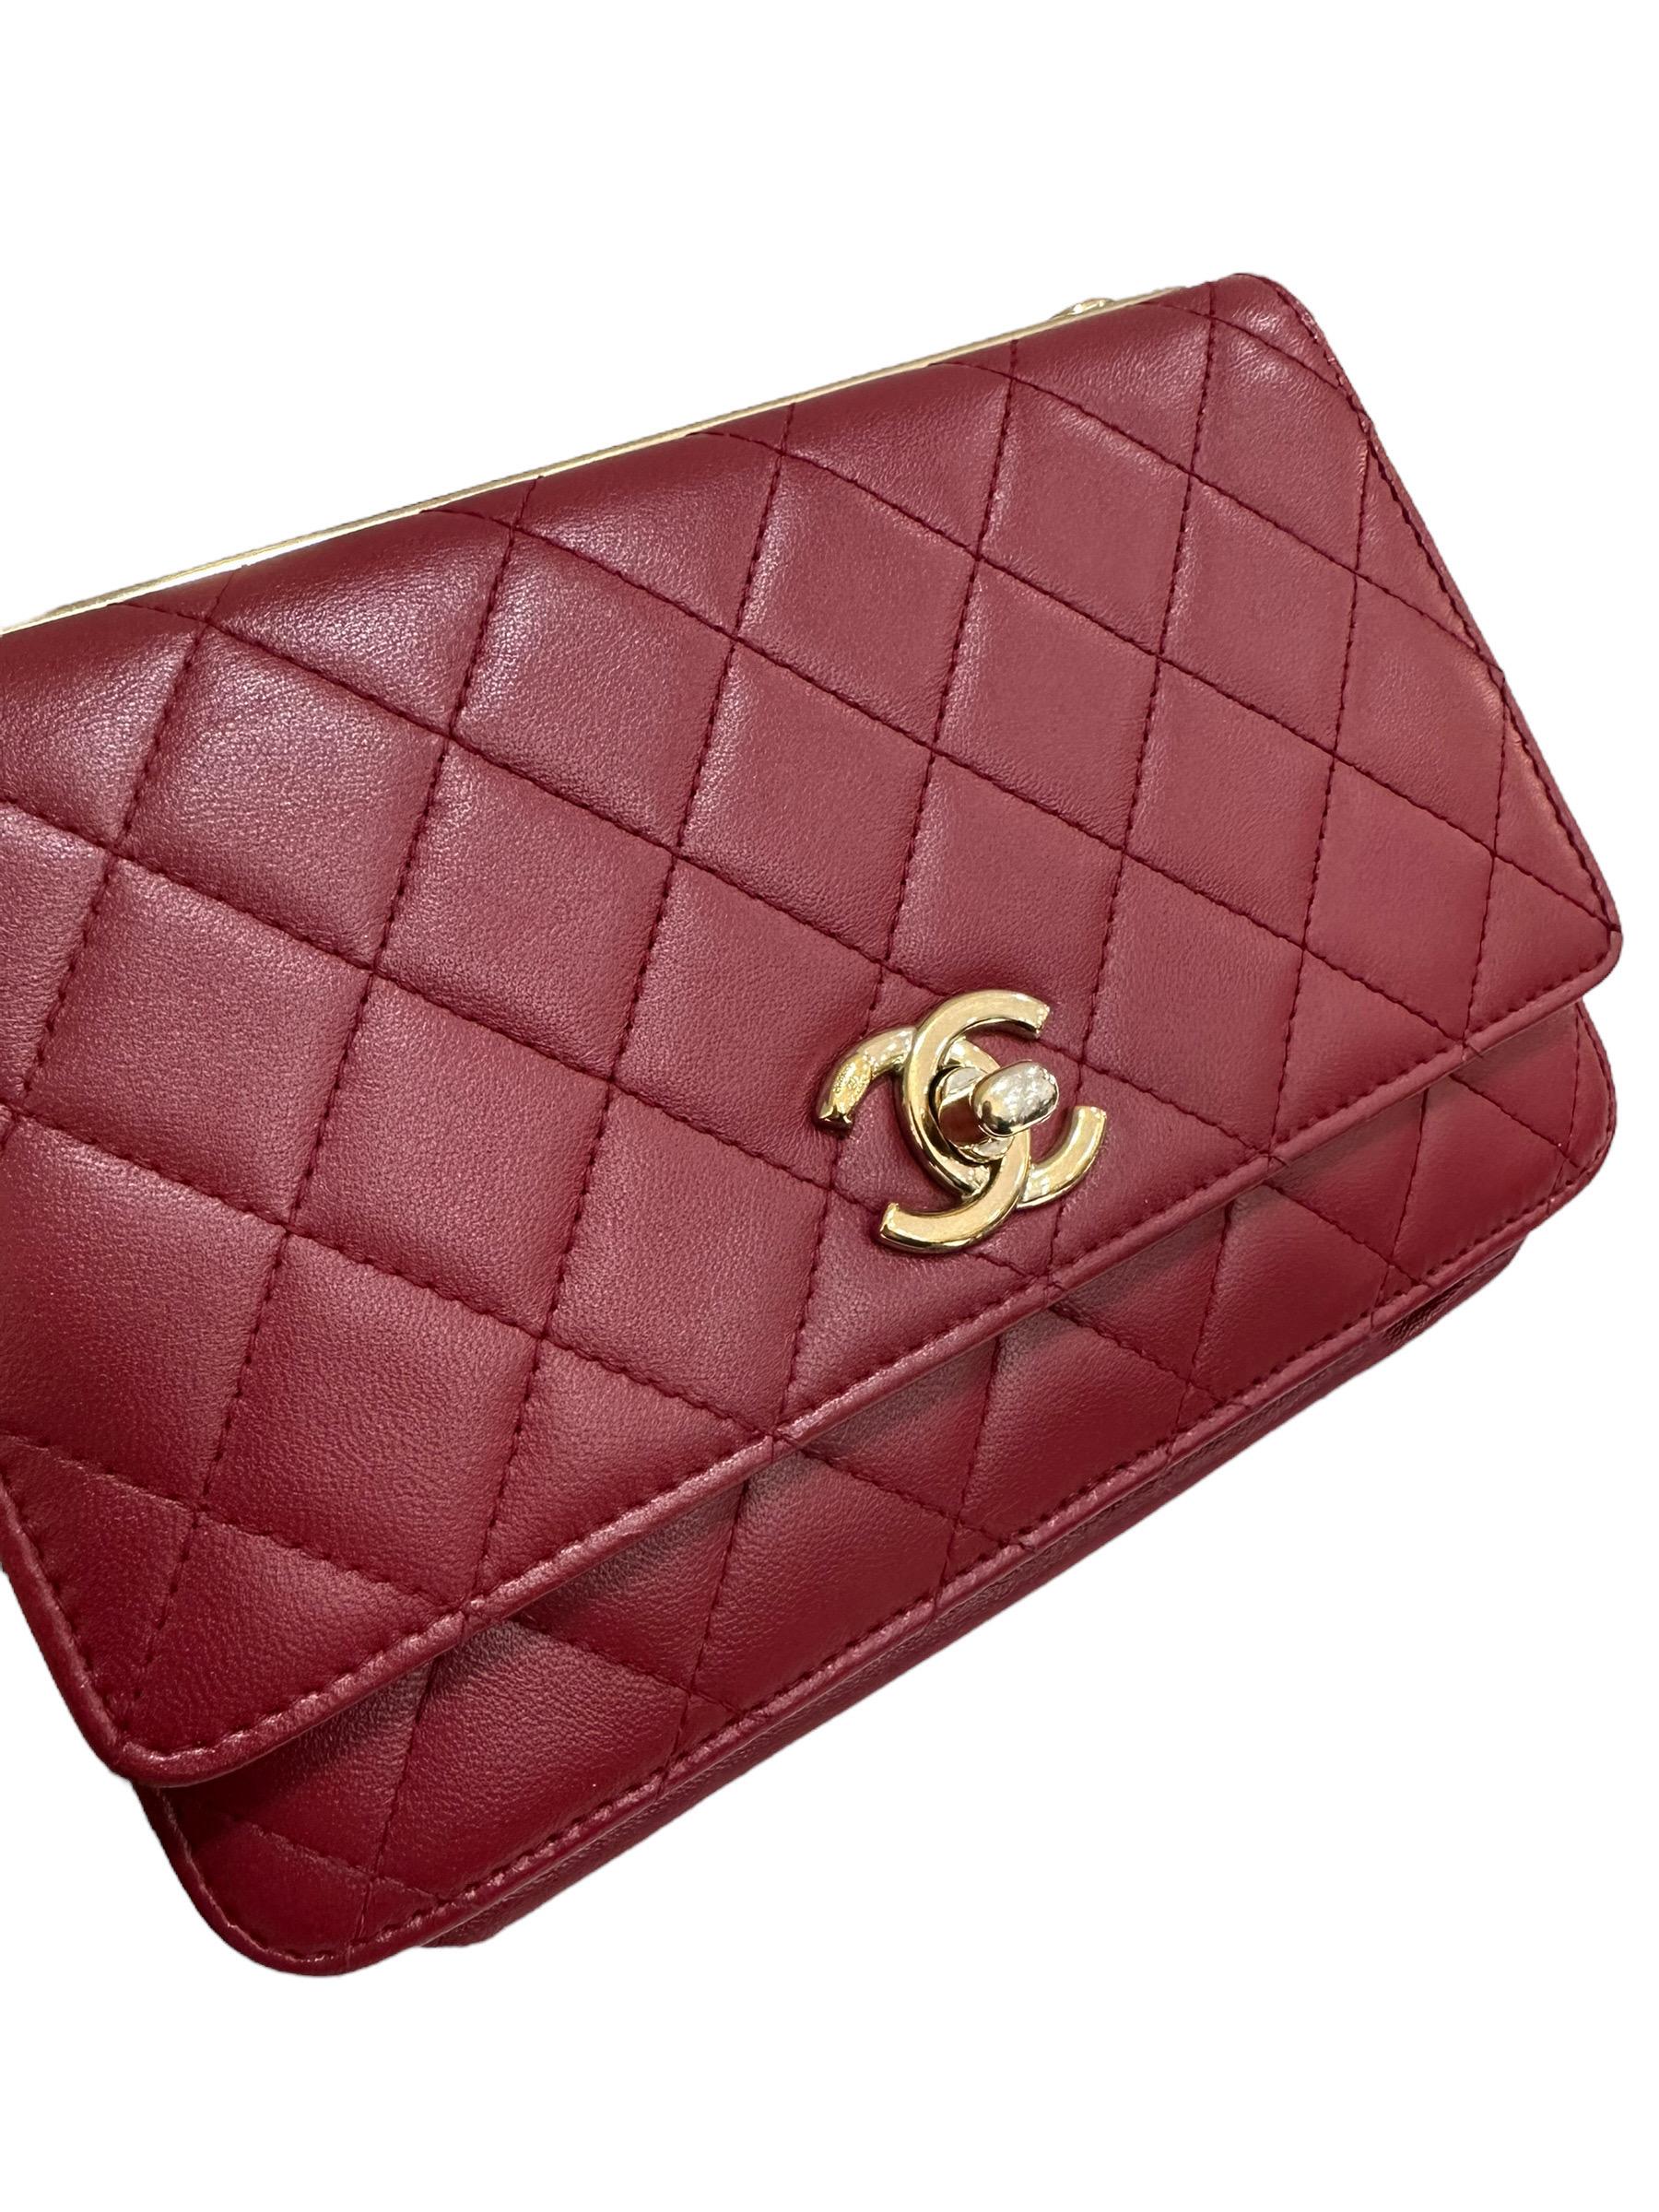 Borsa A Tracolla Chanel Wallet On Chain Rossa 2016/2017 2